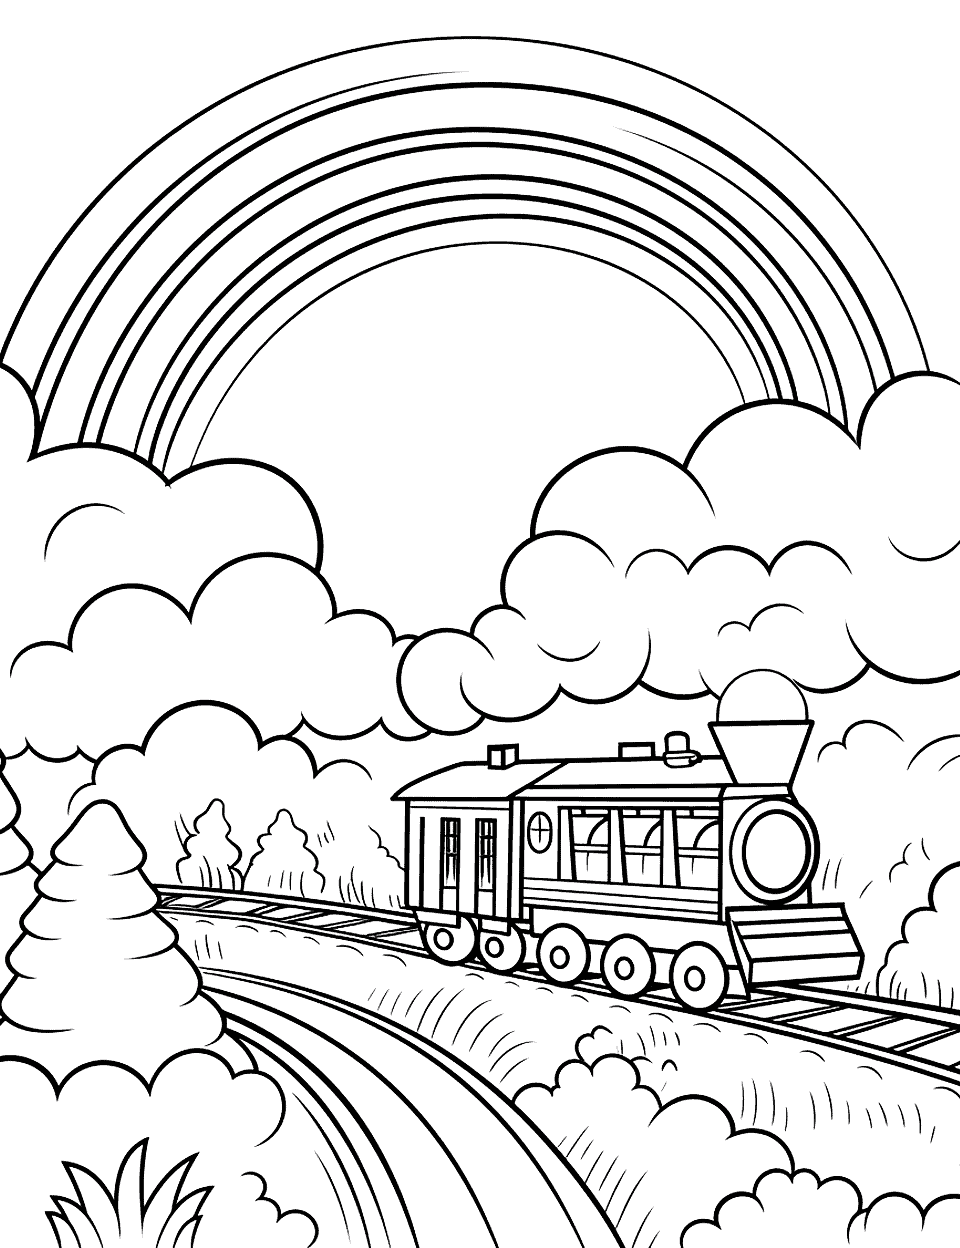 Rainbow Train Coloring Page - A colorful train traveling through the countryside with a rainbow in the background.